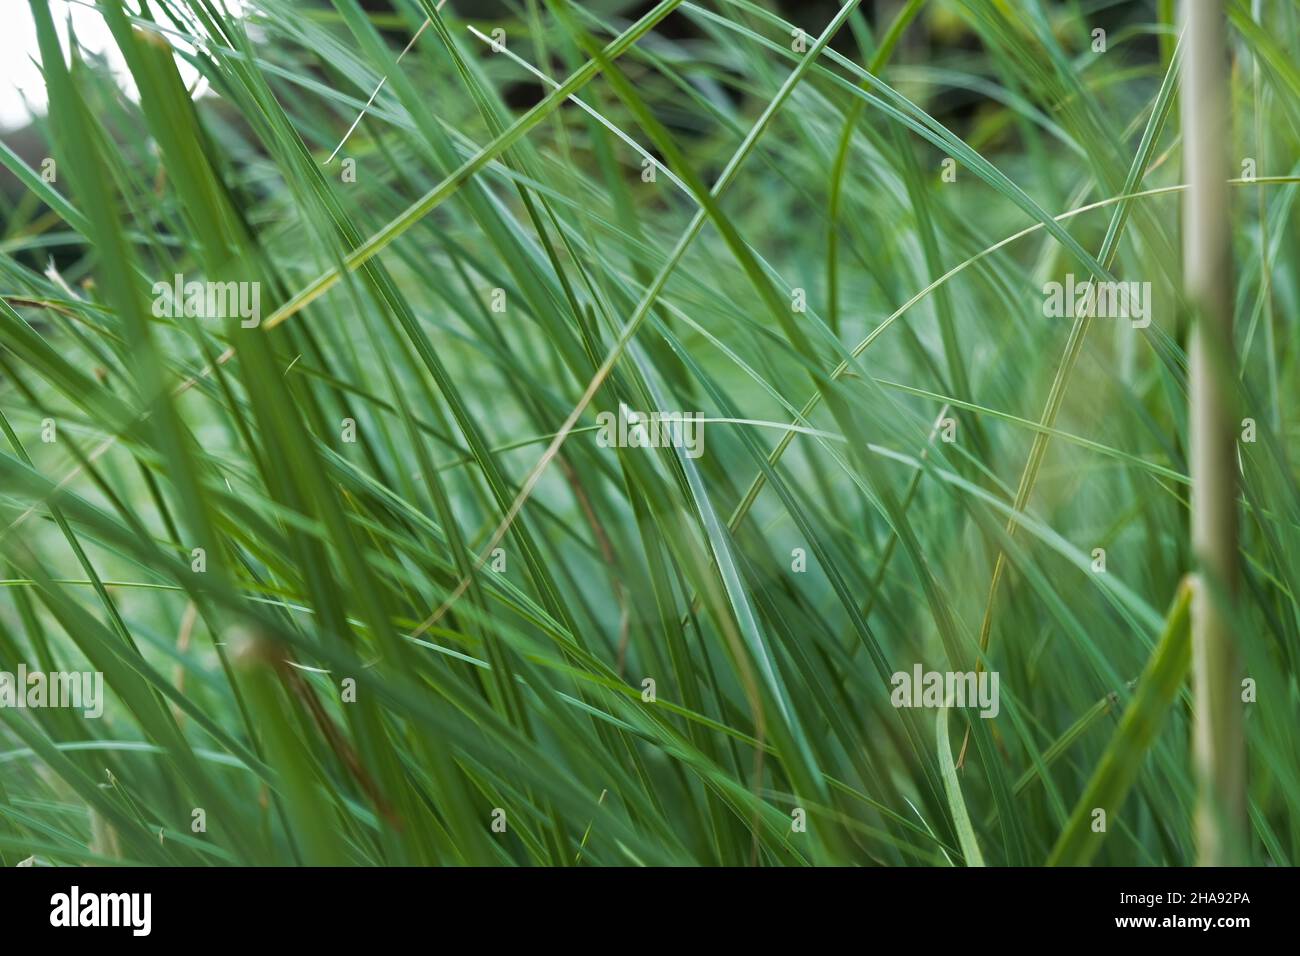 Pampas green grass texture. Trendy fashionable natural background. Pale green thin stems and blades of grass. Abstract composition of decorative garde Stock Photo